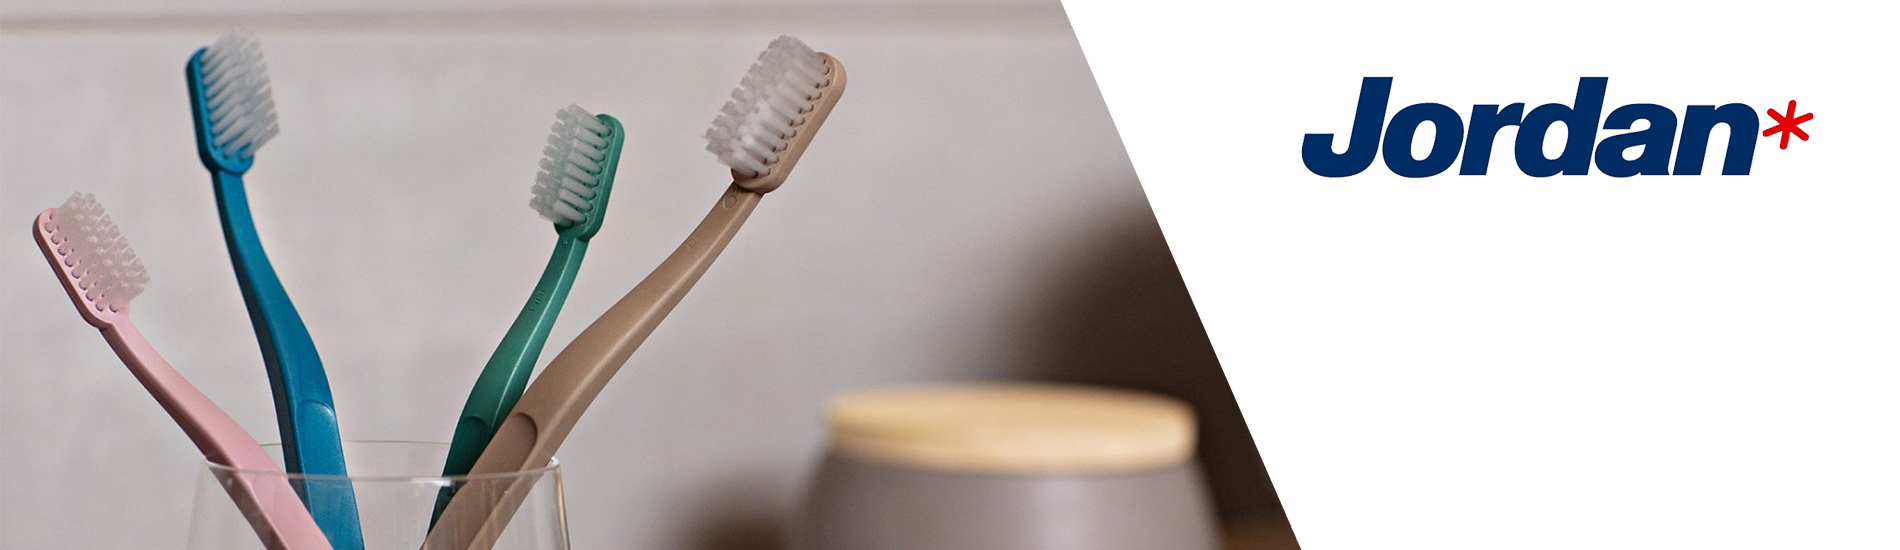 Jordan Toothbrush Is Designed With Both You And Environment In Mind